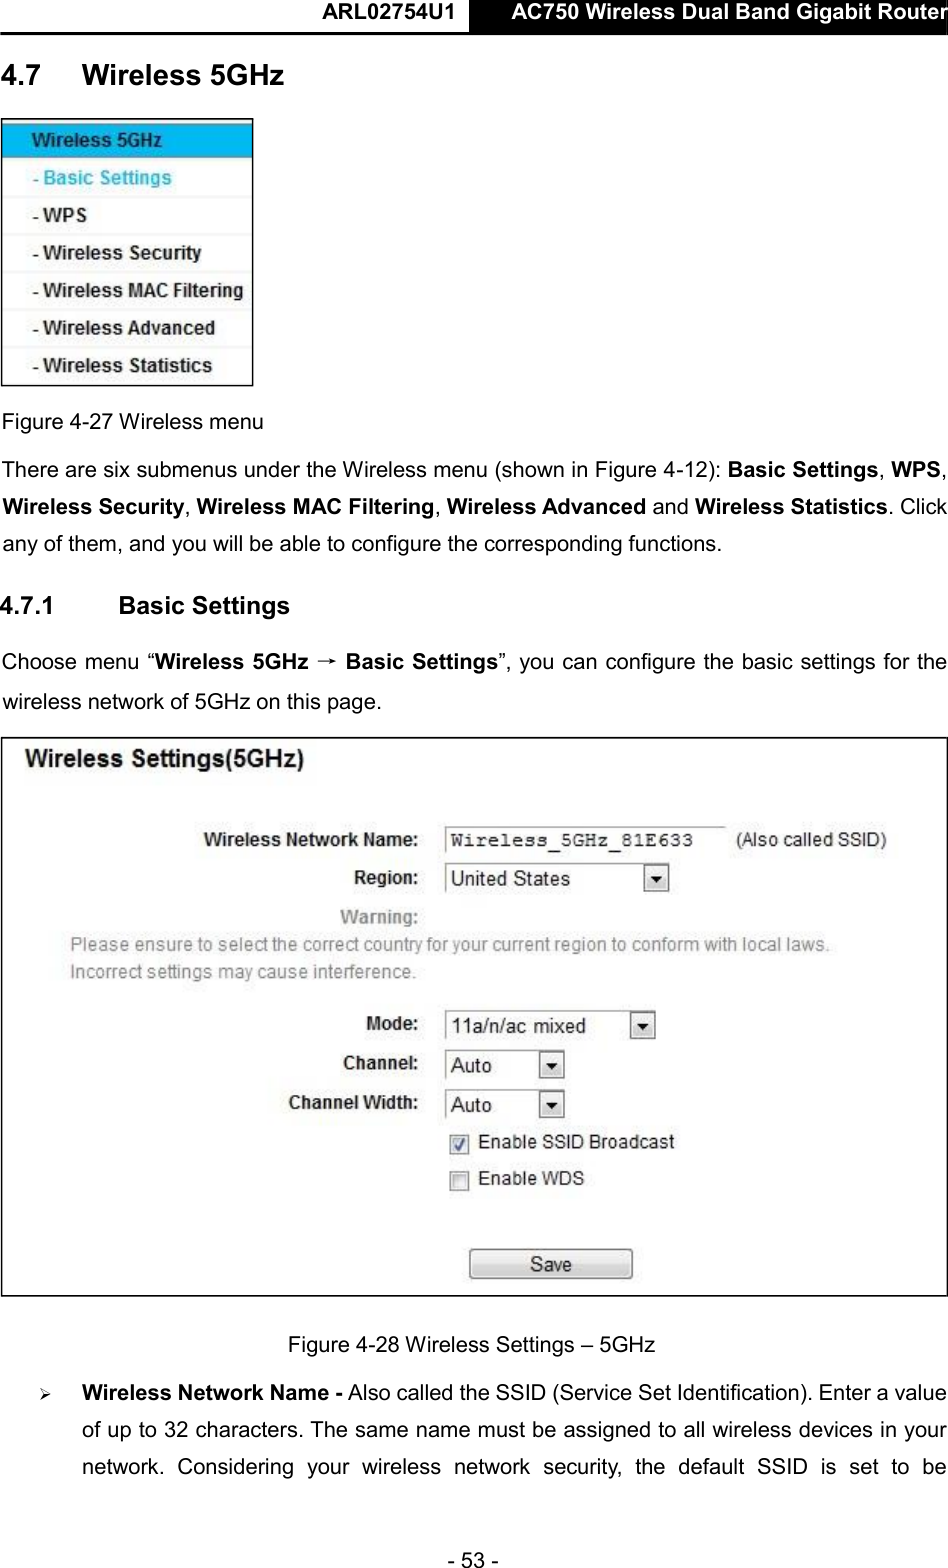  ARL02754U1  AC750 Wireless Dual Band Gigabit Router    - 53 -   Figure 4-27 Wireless menu  There are six submenus under the Wireless menu (shown in Figure 4-12): Basic Settings, WPS, Wireless Security, Wireless MAC Filtering, Wireless Advanced and Wireless Statistics. Click any of them, and you will be able to configure the corresponding functions.   4.7.1  Basic Settings  Choose menu “Wireless 5GHz → Basic Settings”, you can configure the basic settings for the wireless network of 5GHz on this page.   Figure 4-28 Wireless Settings – 5GHz   Wireless Network Name - Also called the SSID (Service Set Identification). Enter a value of up to 32 characters. The same name must be assigned to all wireless devices in your network.  Considering  your  wireless  network  security,  the  default  SSID  is  set  to  be 4.7   Wireless 5GHz      